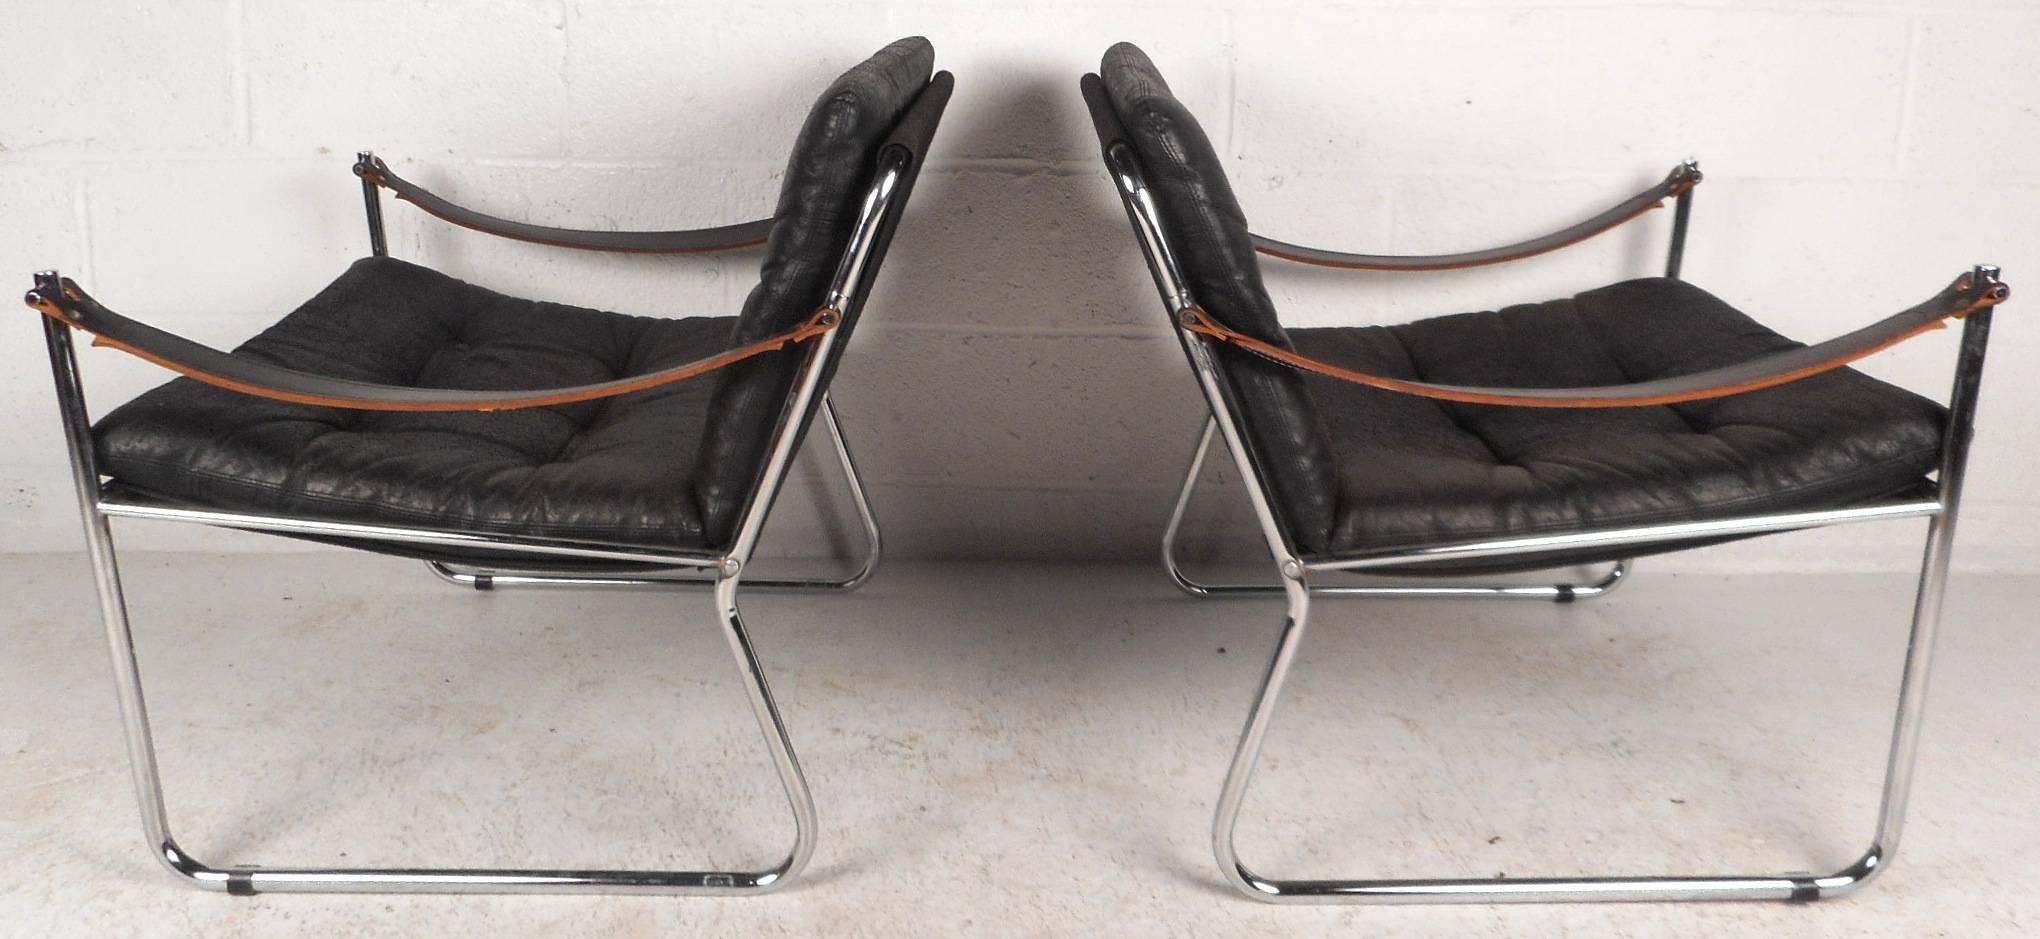 Scandinavian Modern Unique Mid-Century Modern Safari Style Lounge Chairs with Leather Arm Rests